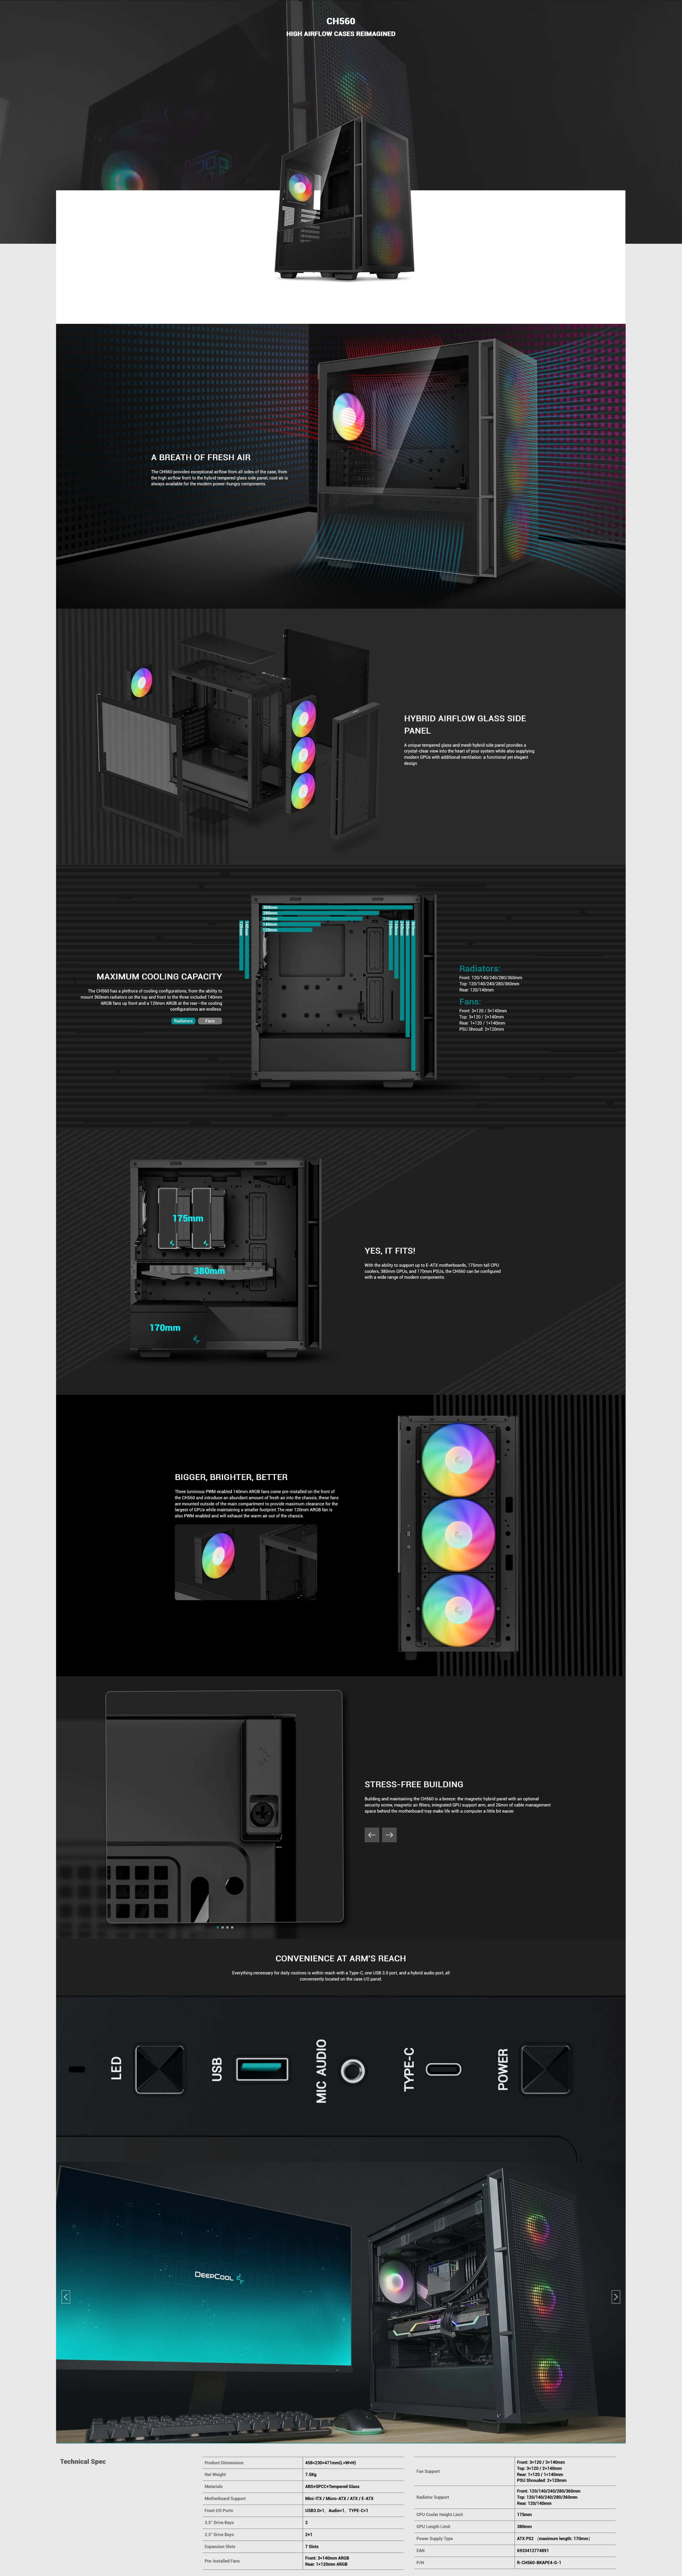 A large marketing image providing additional information about the product DeepCool CH560 Mid Tower Case - Black - Additional alt info not provided